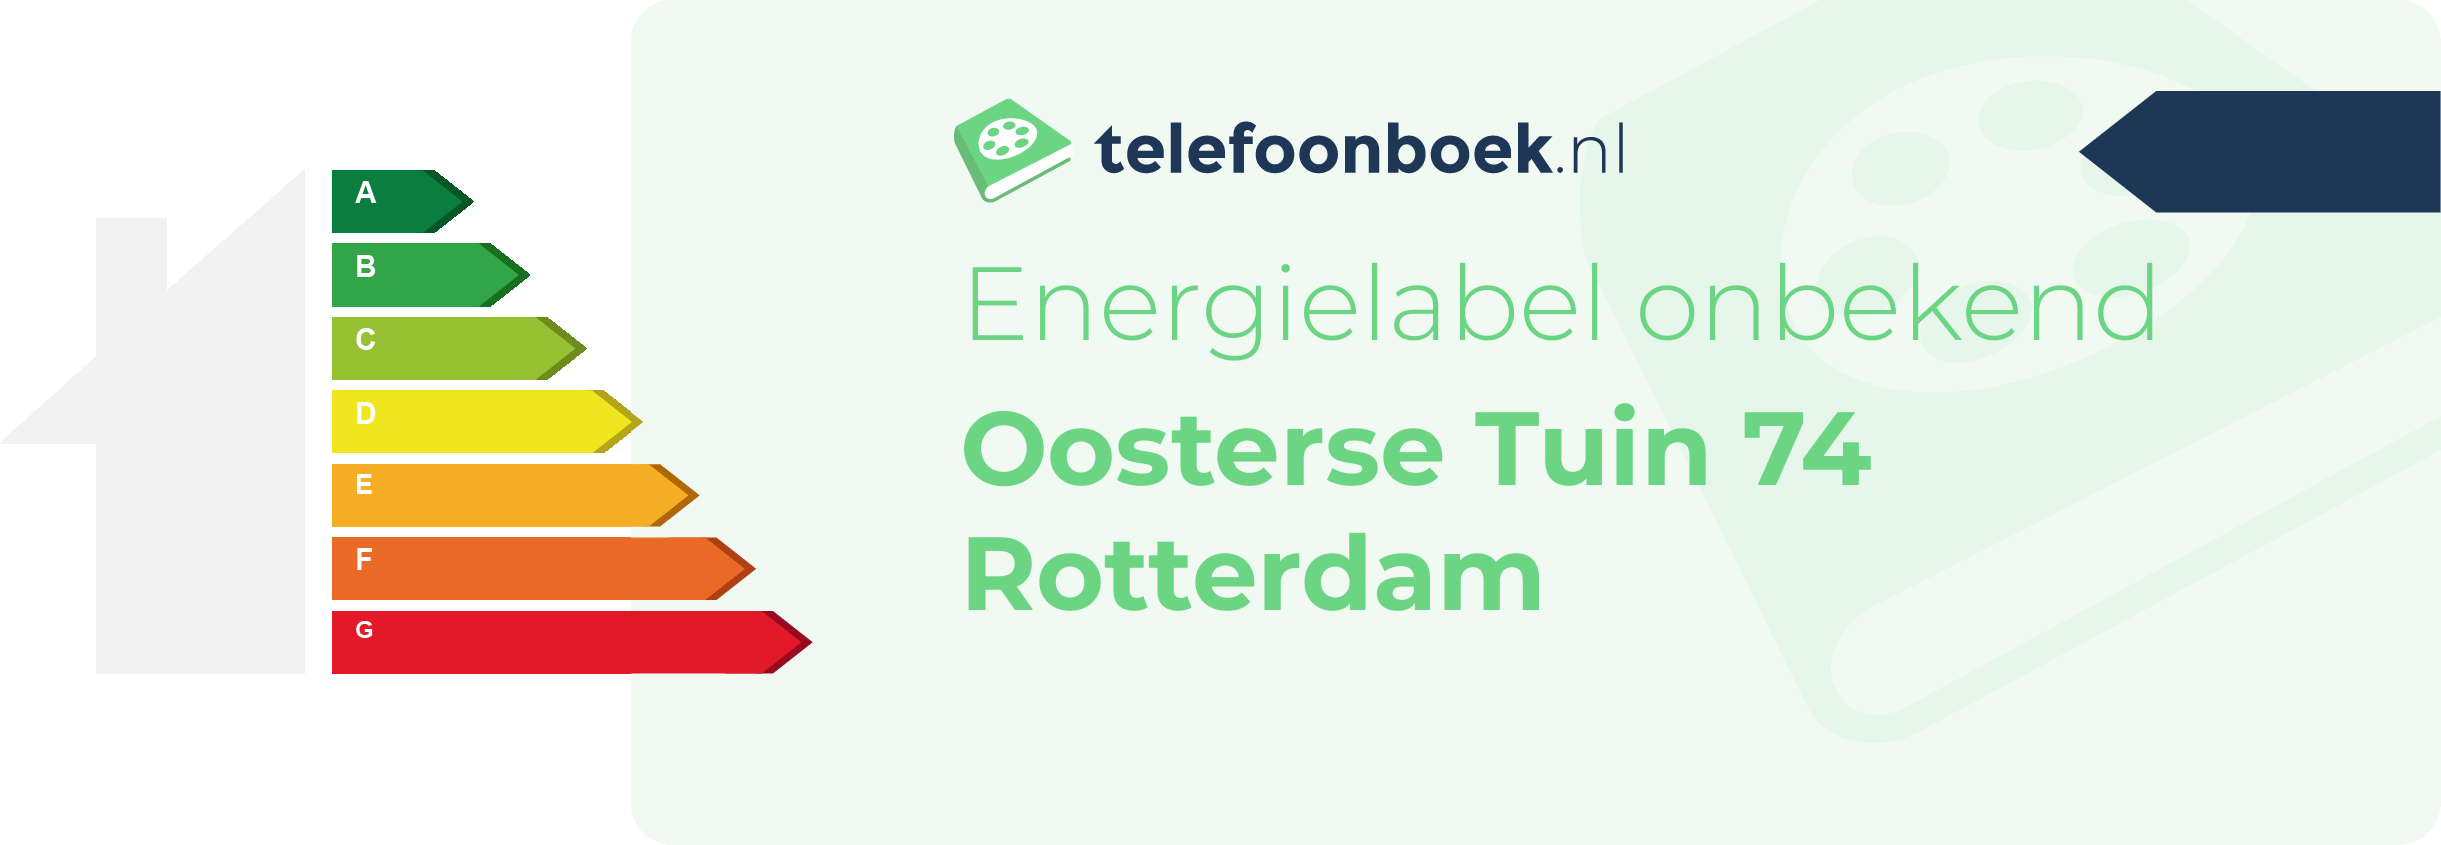 Energielabel Oosterse Tuin 74 Rotterdam